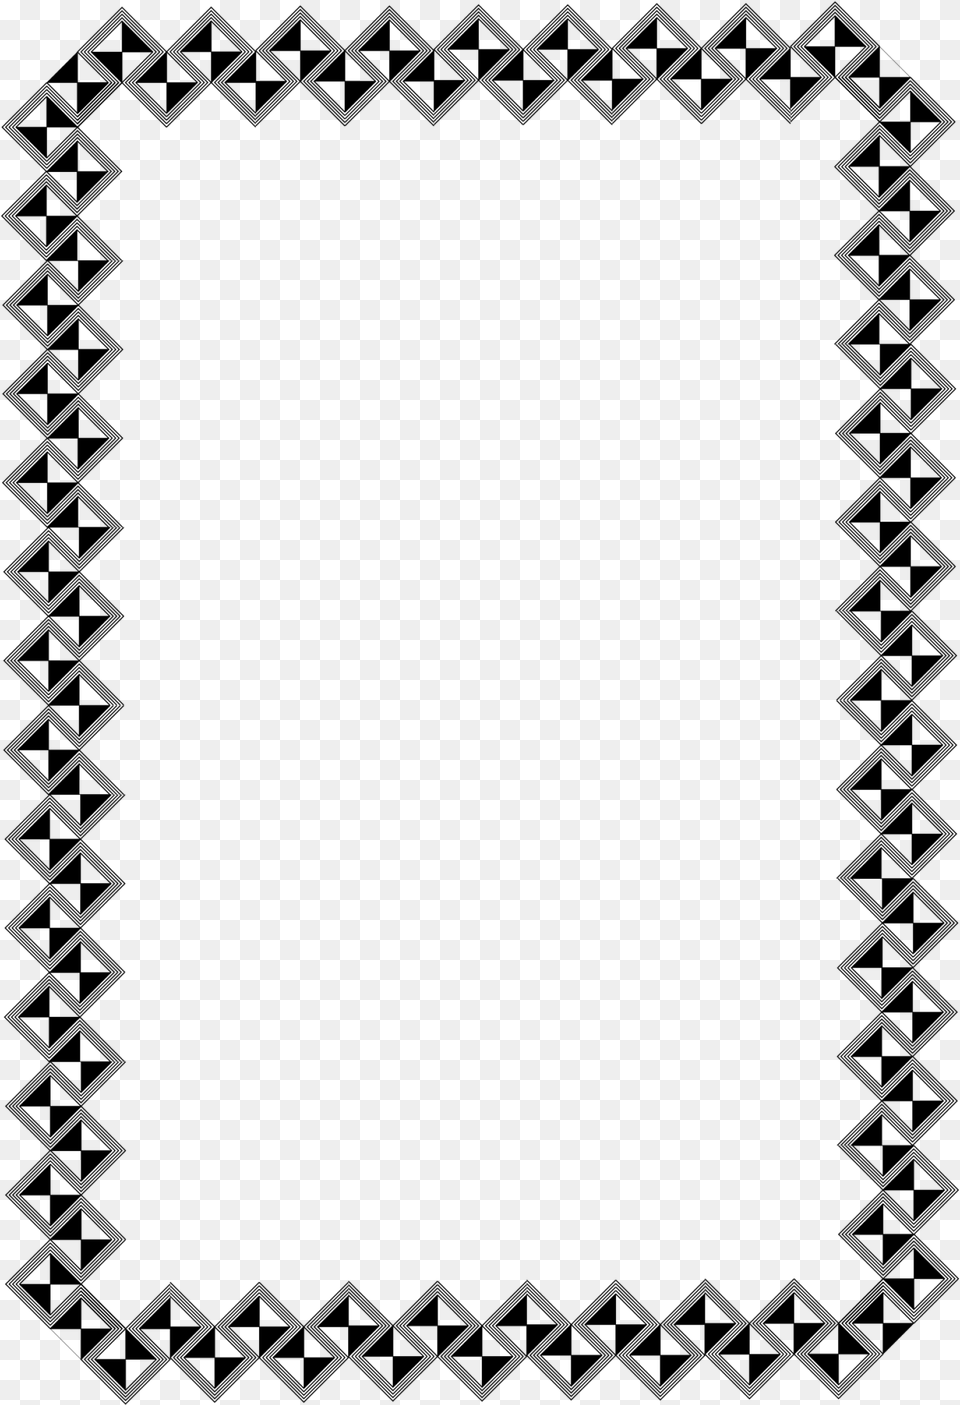 Border Svg File African Border Black And White, Gray Png Image